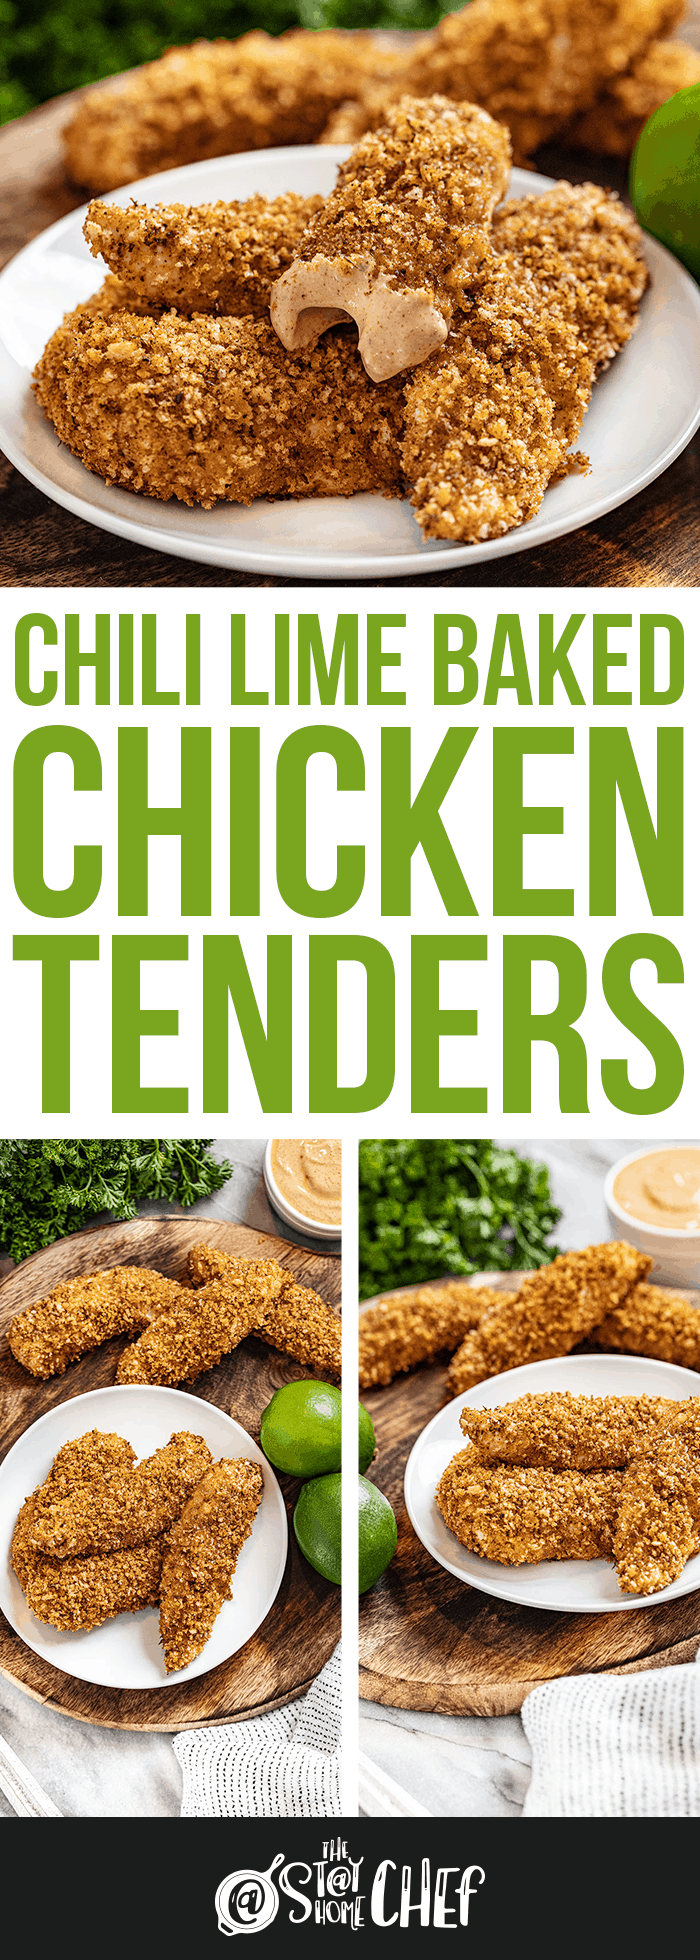 Photo Collage of Chili Lime Baked Chicken Tenders